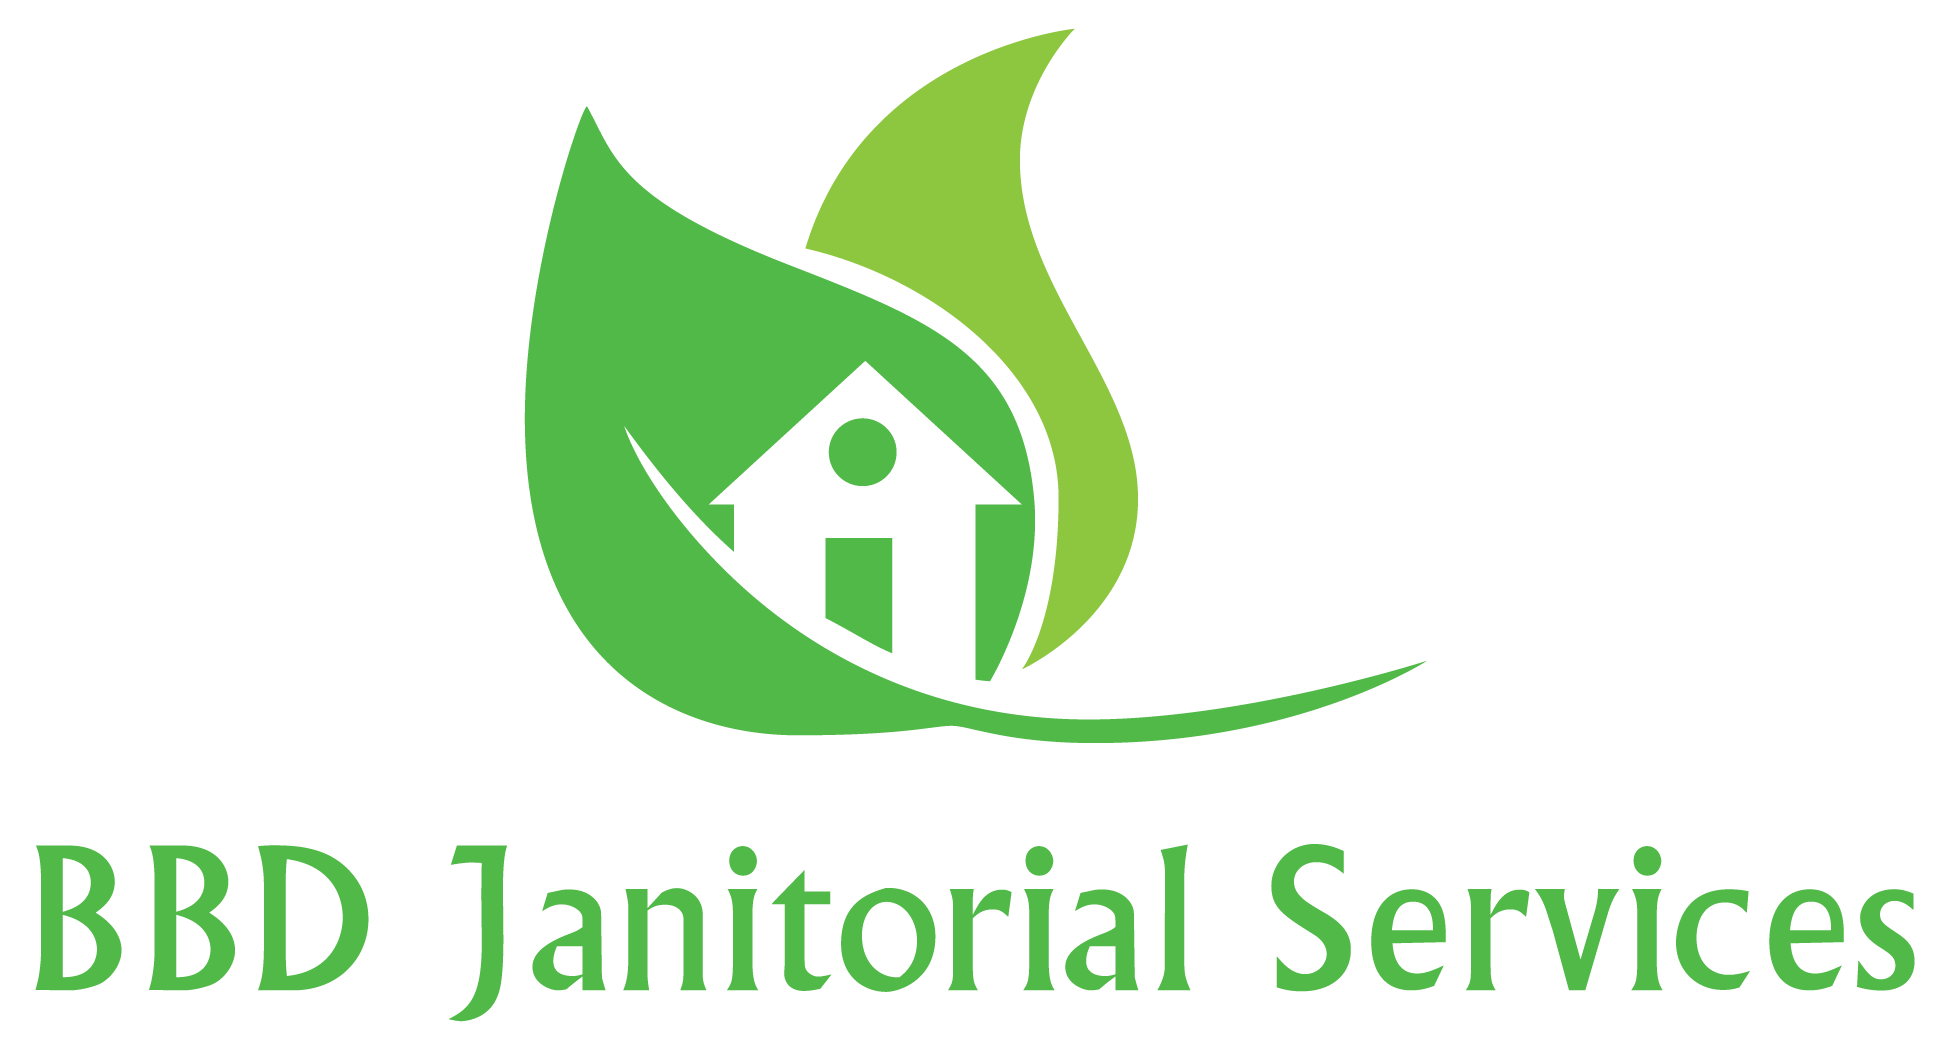 BBD Janitorial Services Logo